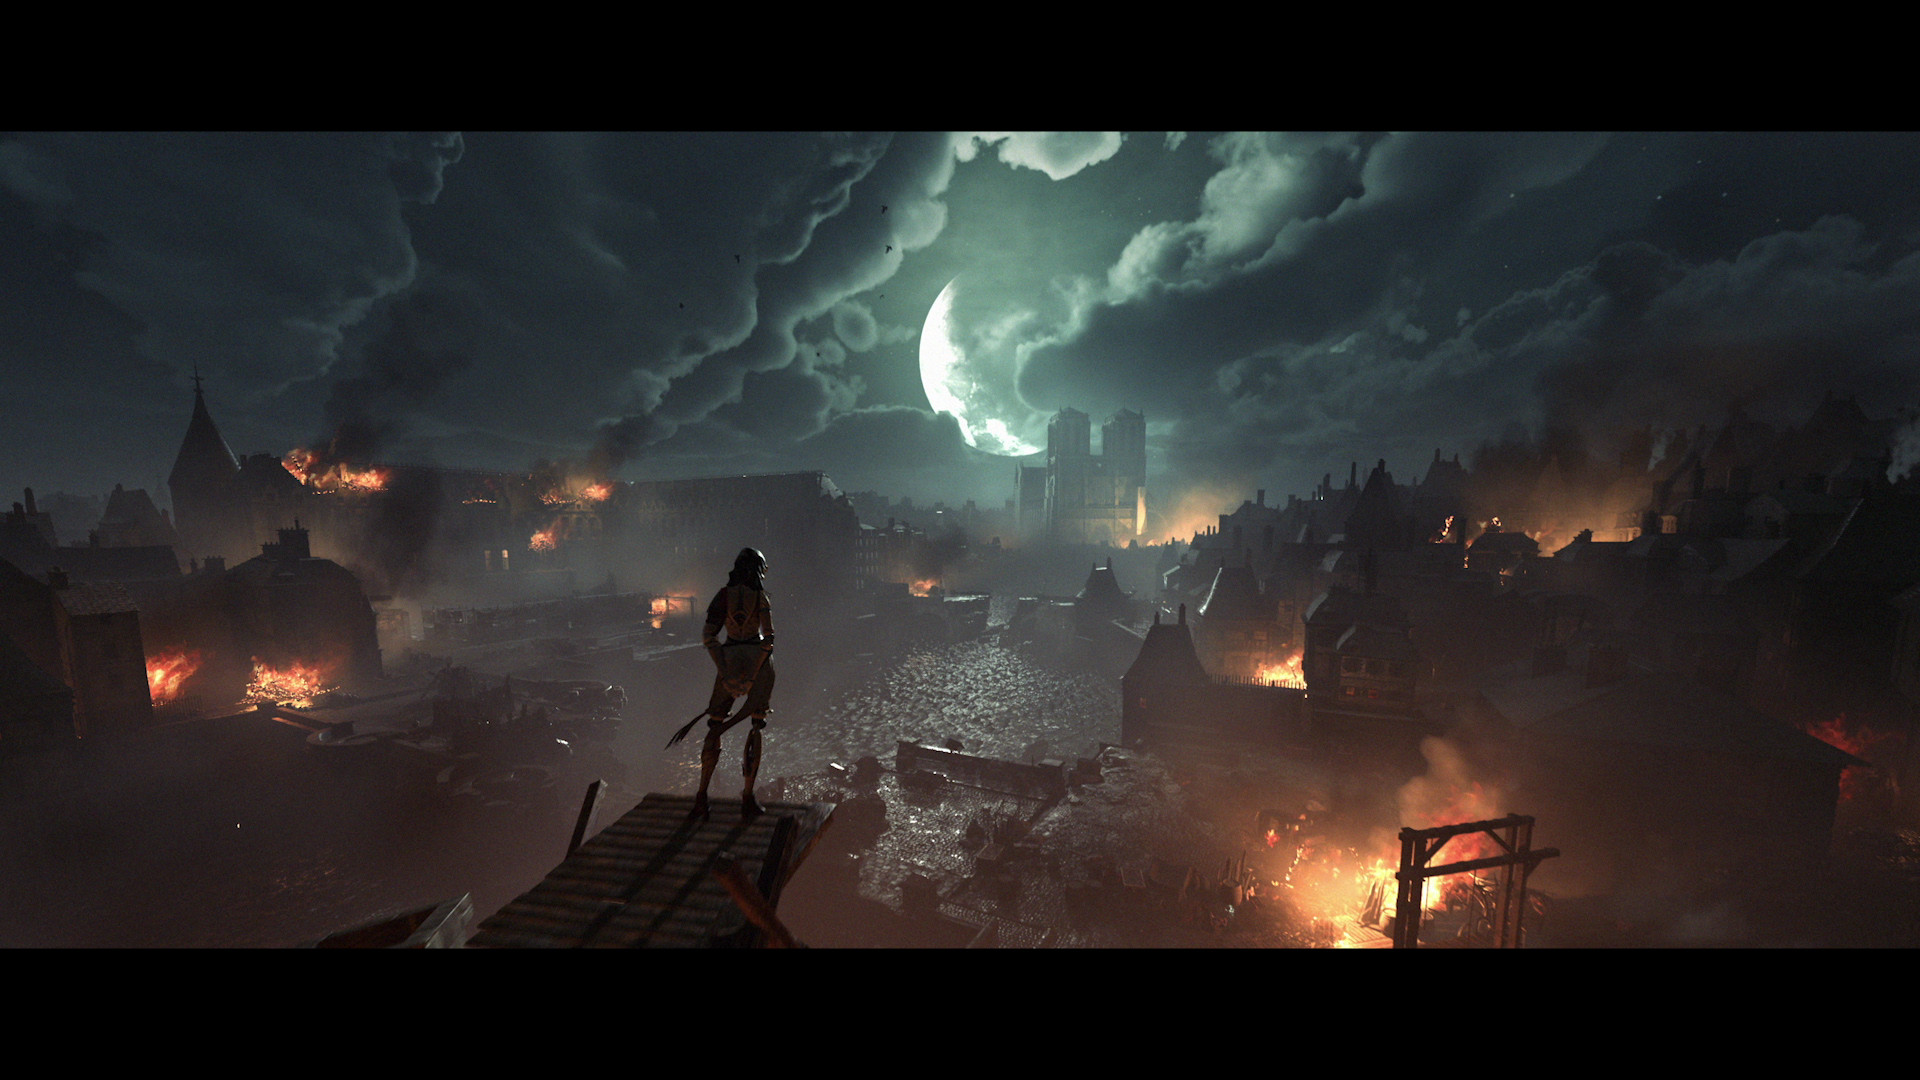 Aegis standing over a burning city.